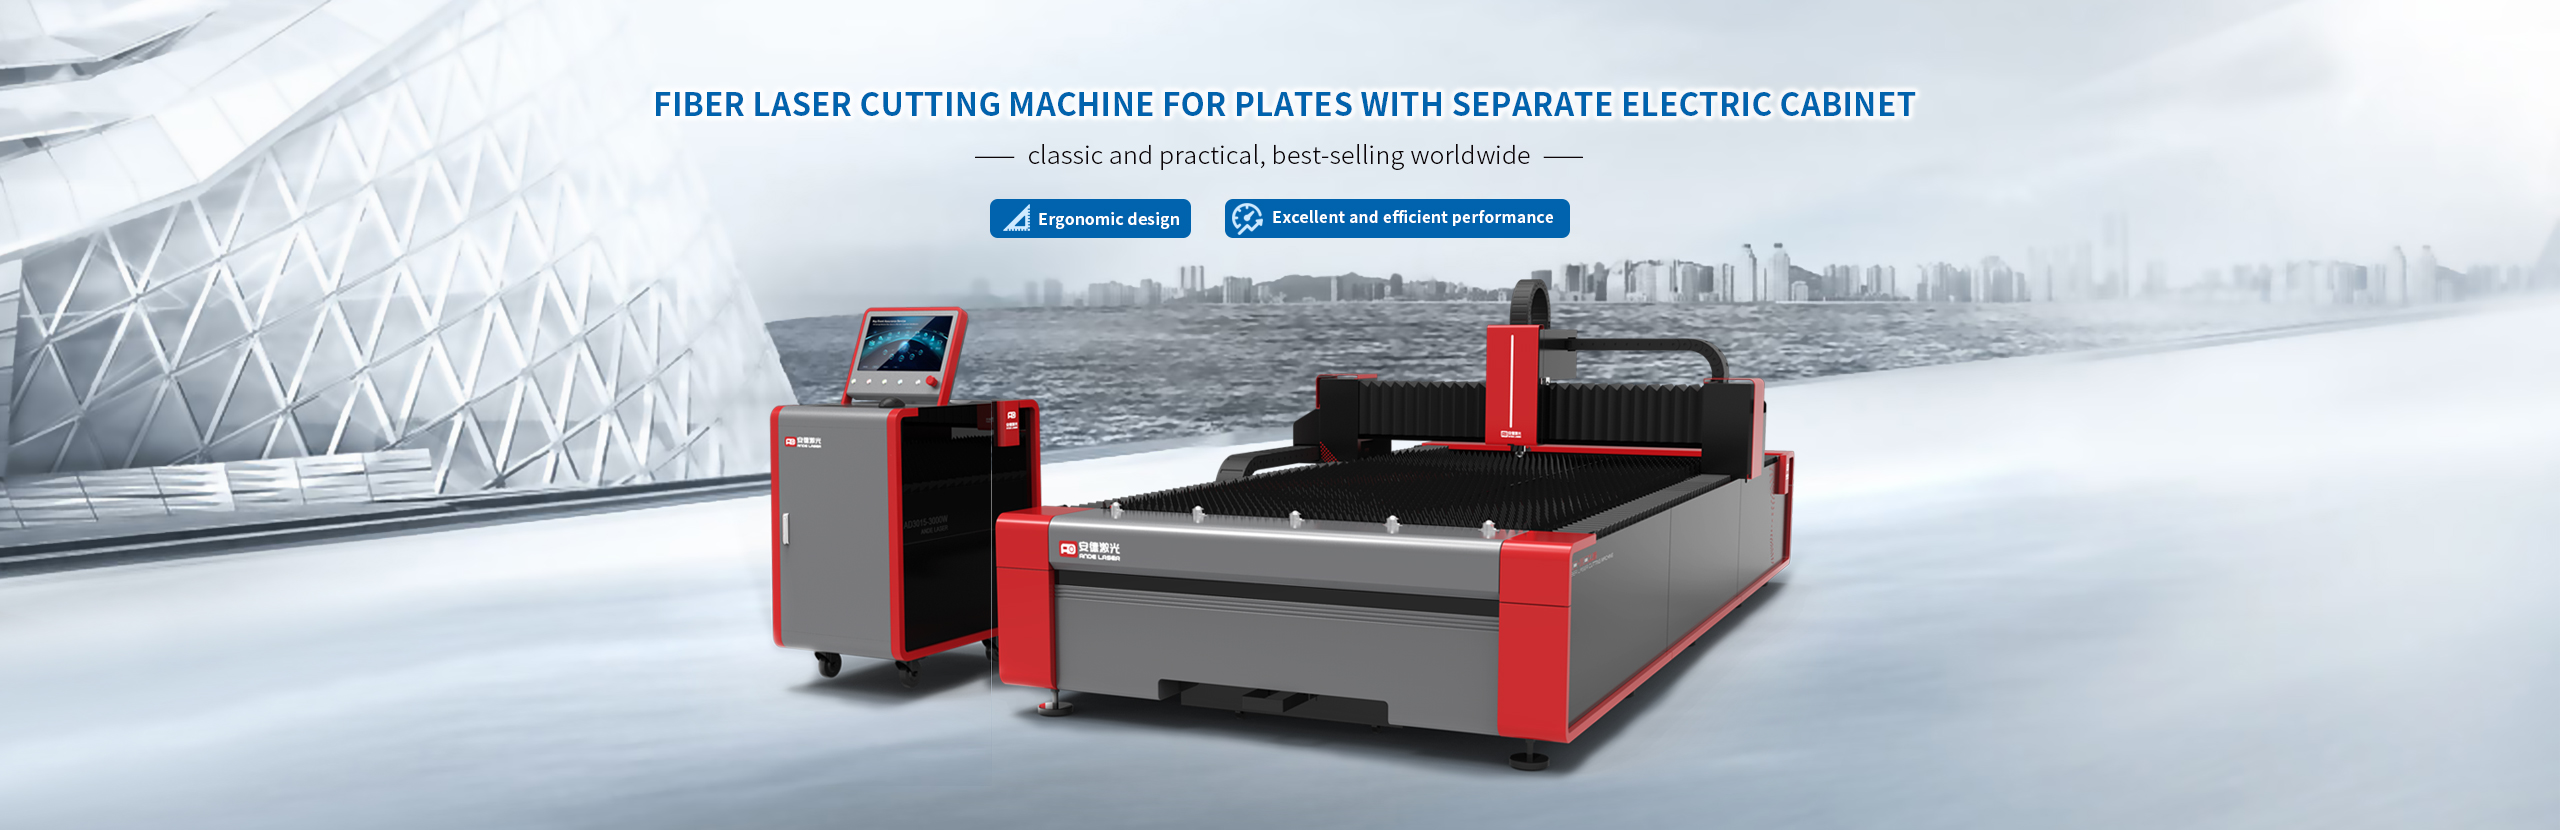 FIBER LASER CUTTING MACHINE FOR PLATES WITH SEPARATE ELECTRIC CABINET